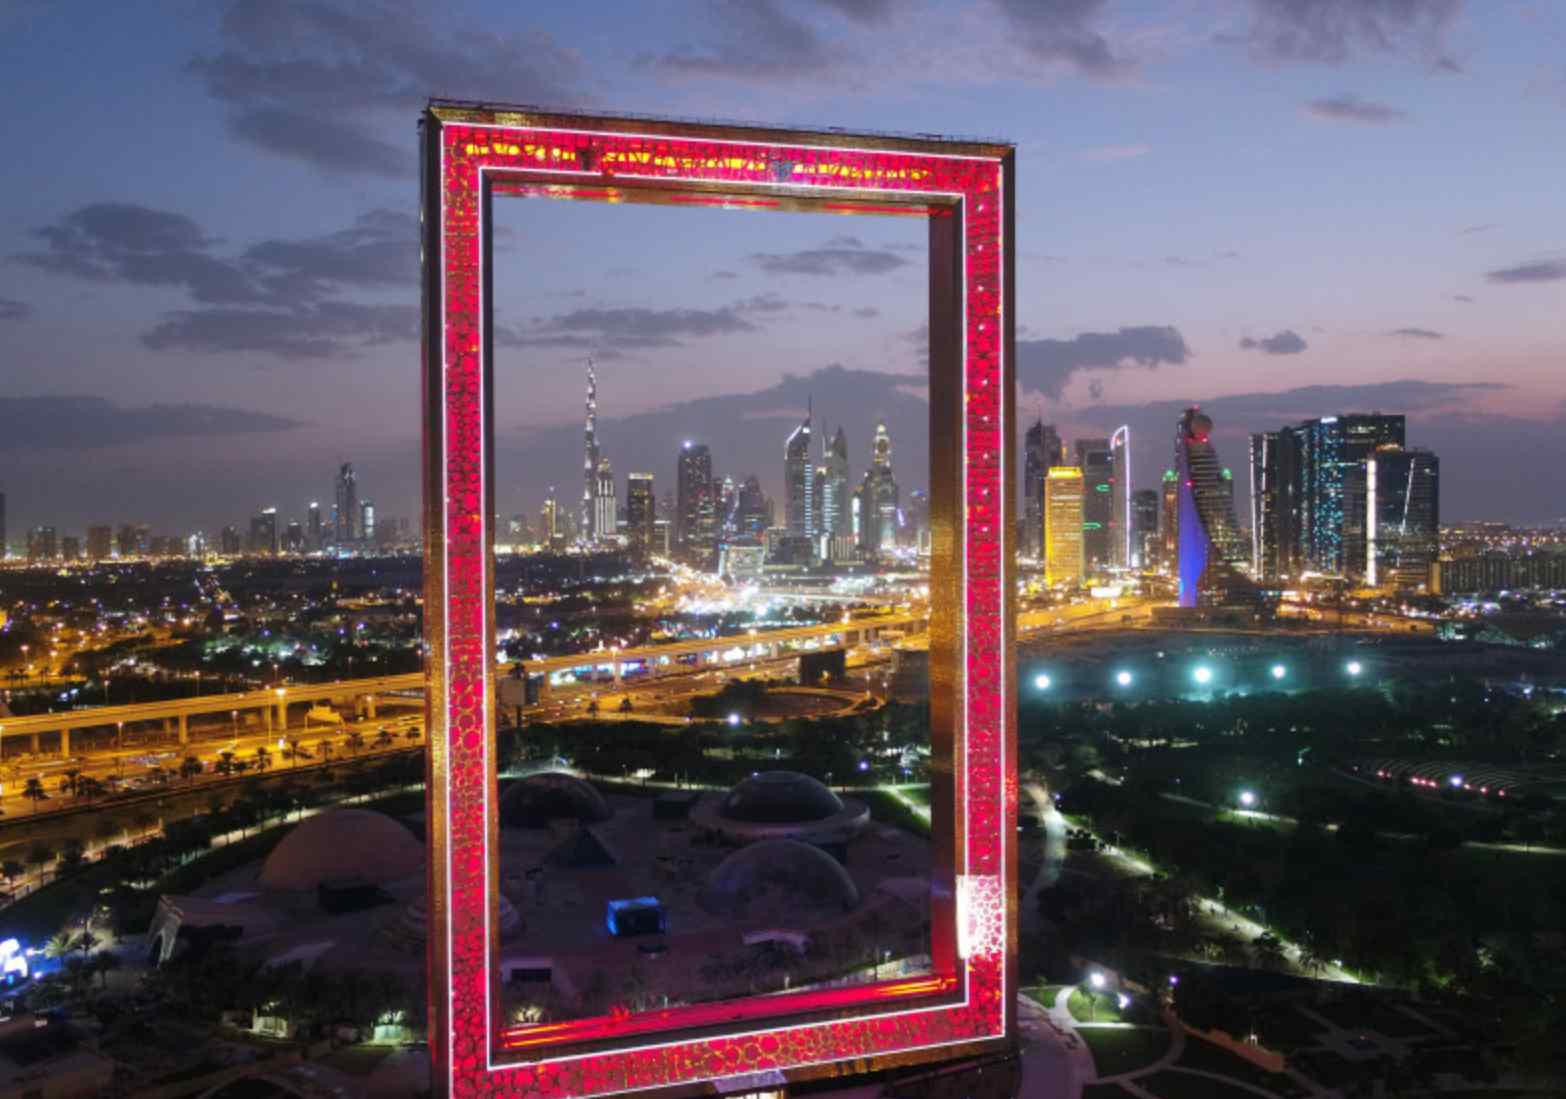 The price of Dubai frame tickets depends on the visitors' age.